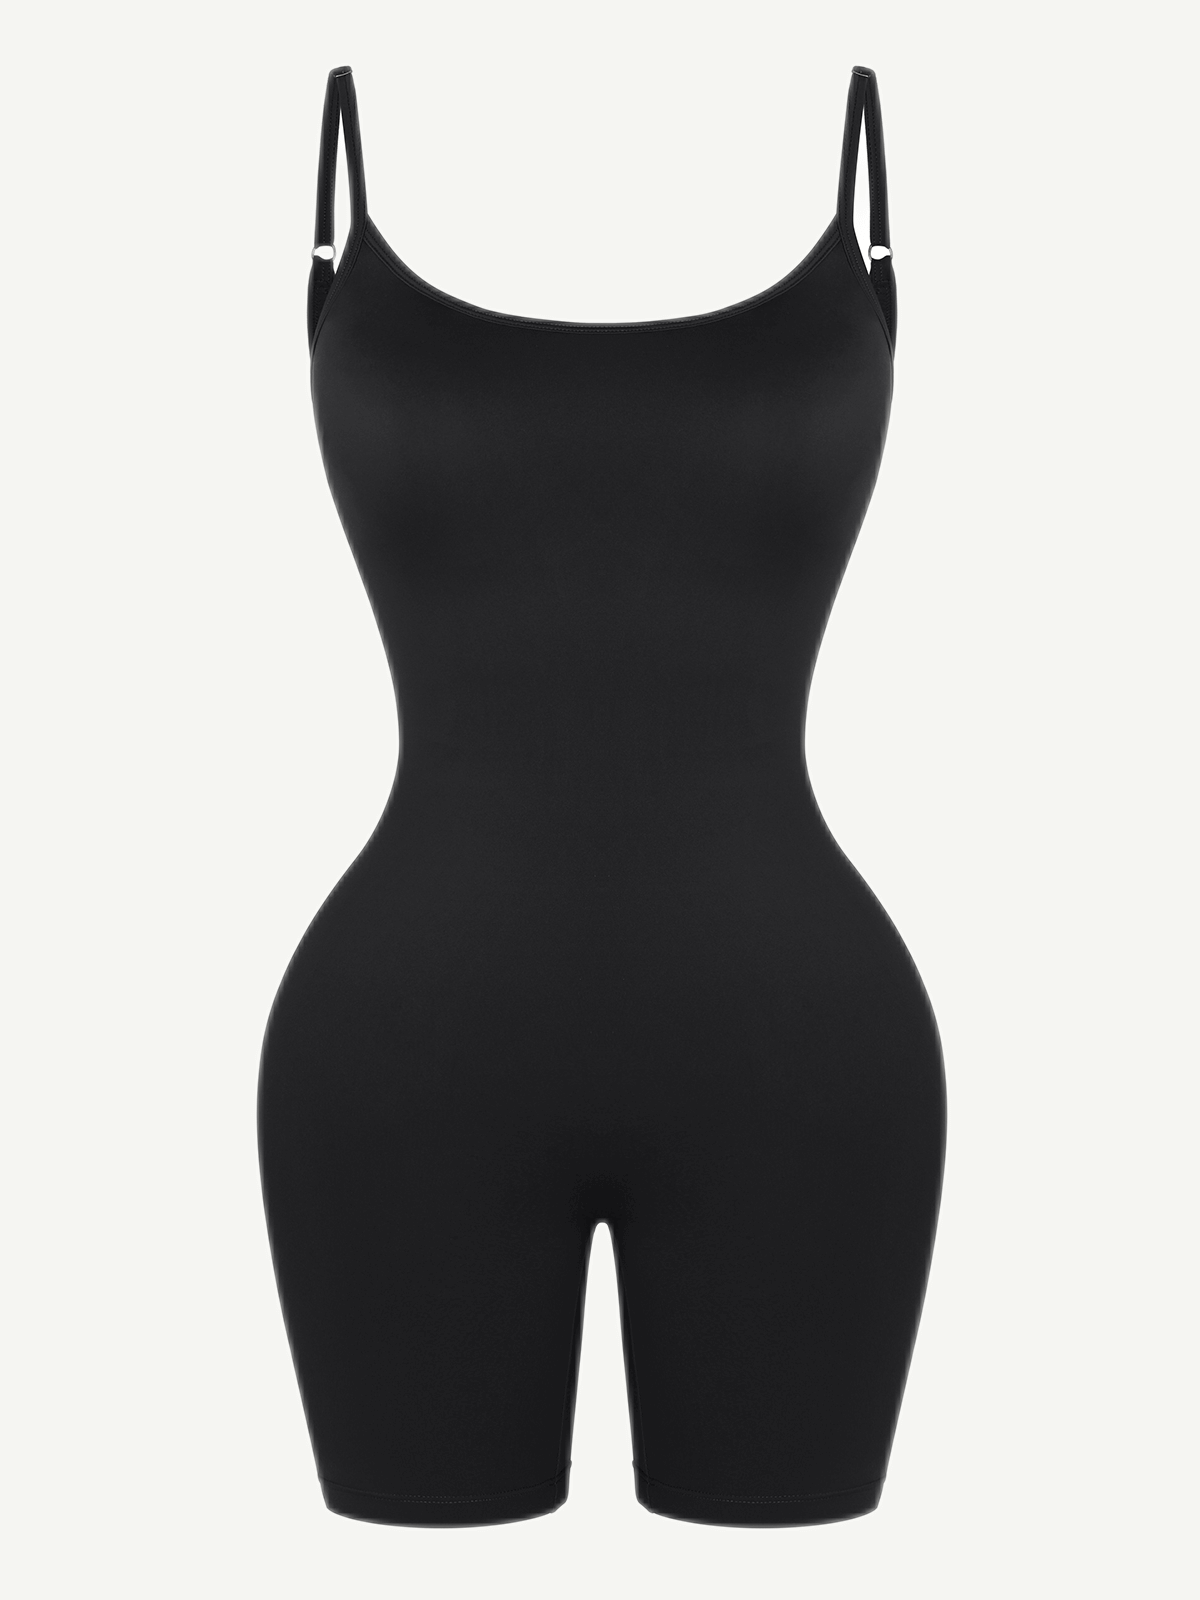 Wholesale Mid-Thigh Fitness & Shaping Breathable Bodysuit